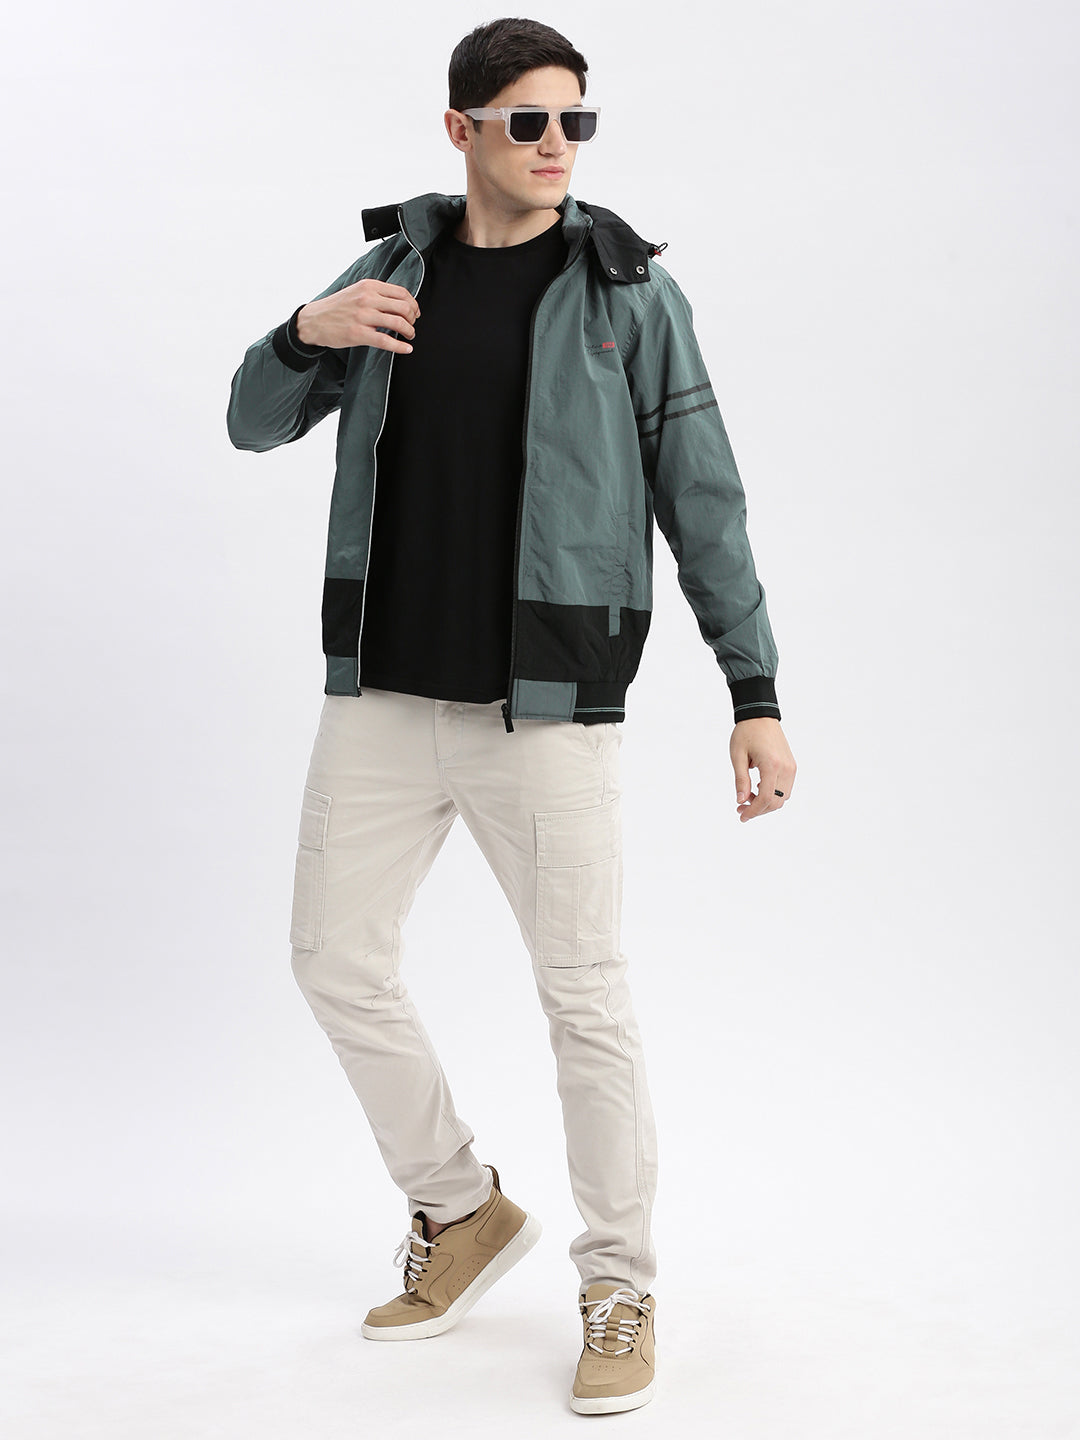 Men Colourblocked Mock Collar Teal Bomber Jacket Comes with Detachable Hoodie